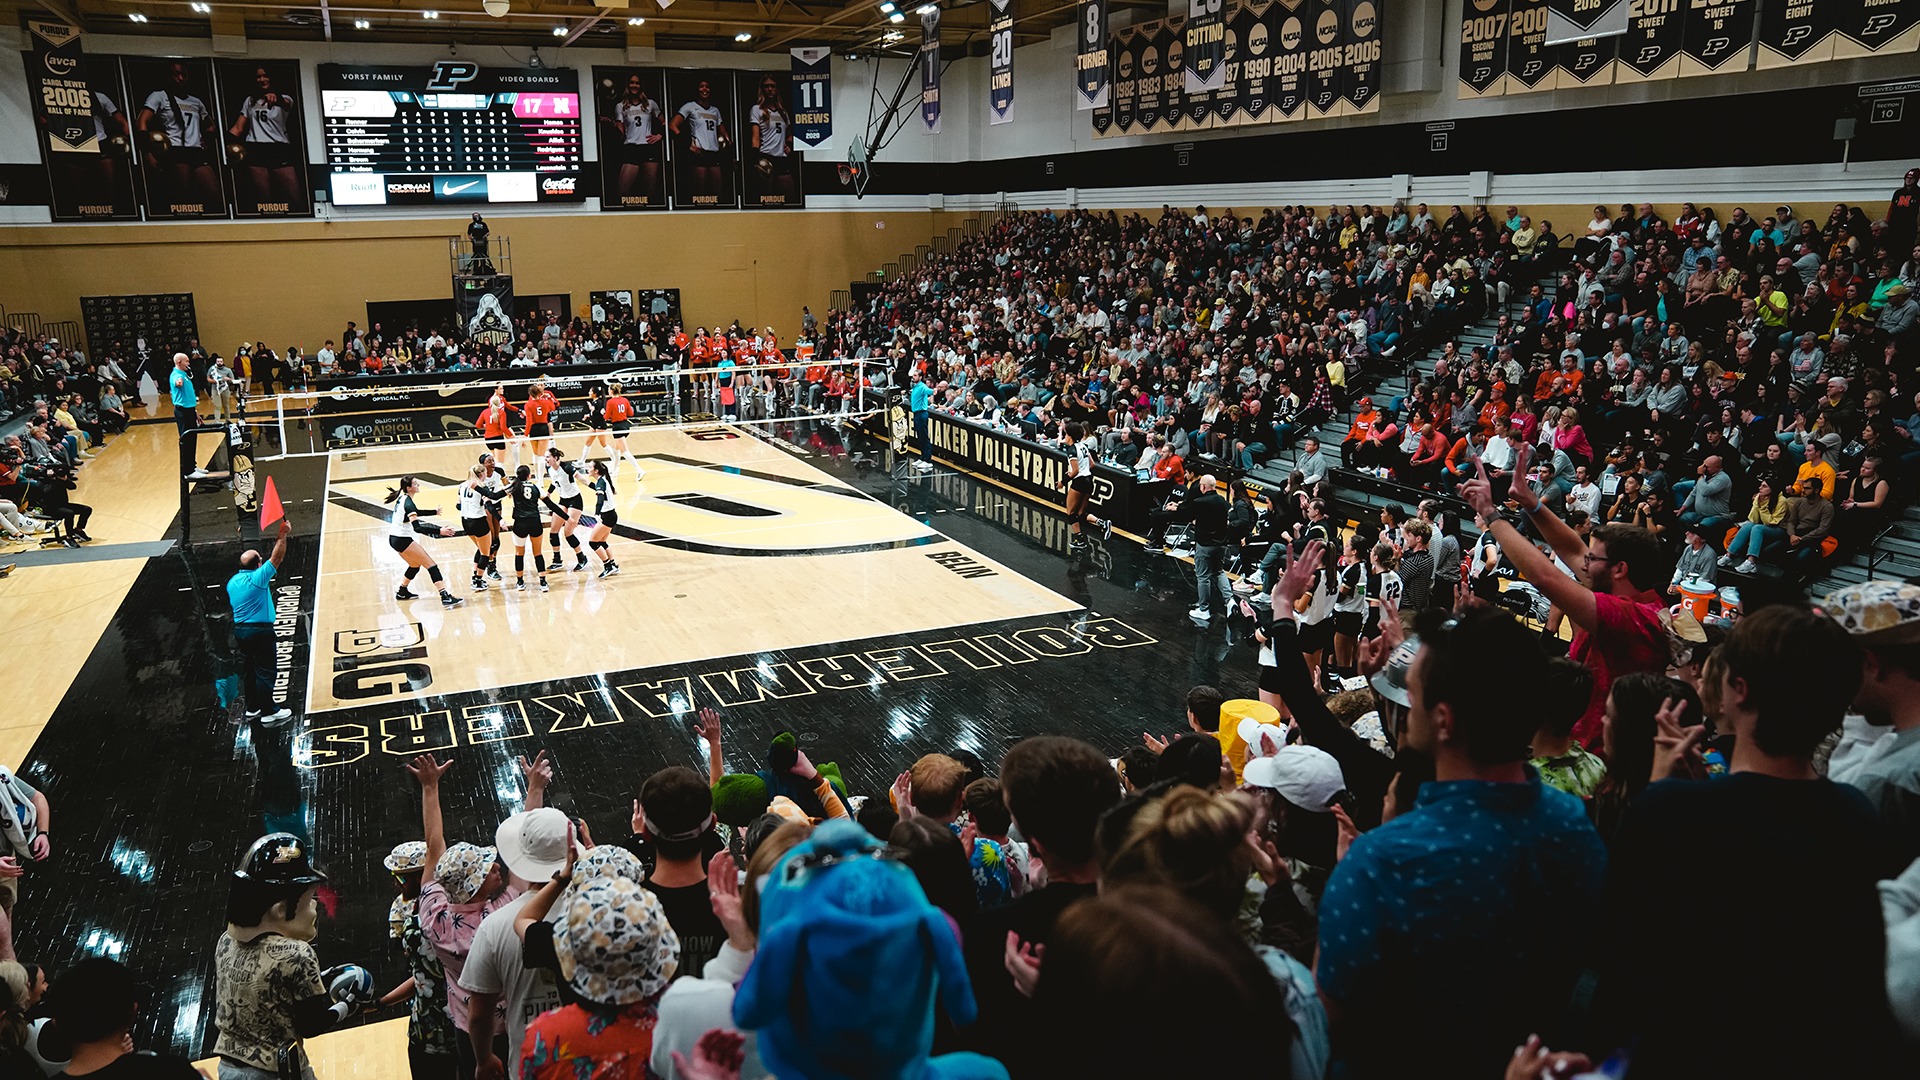 Purdue Women's Volleyball playing a home game at Holloway Gymnasium in West Lafayette, Indiana.